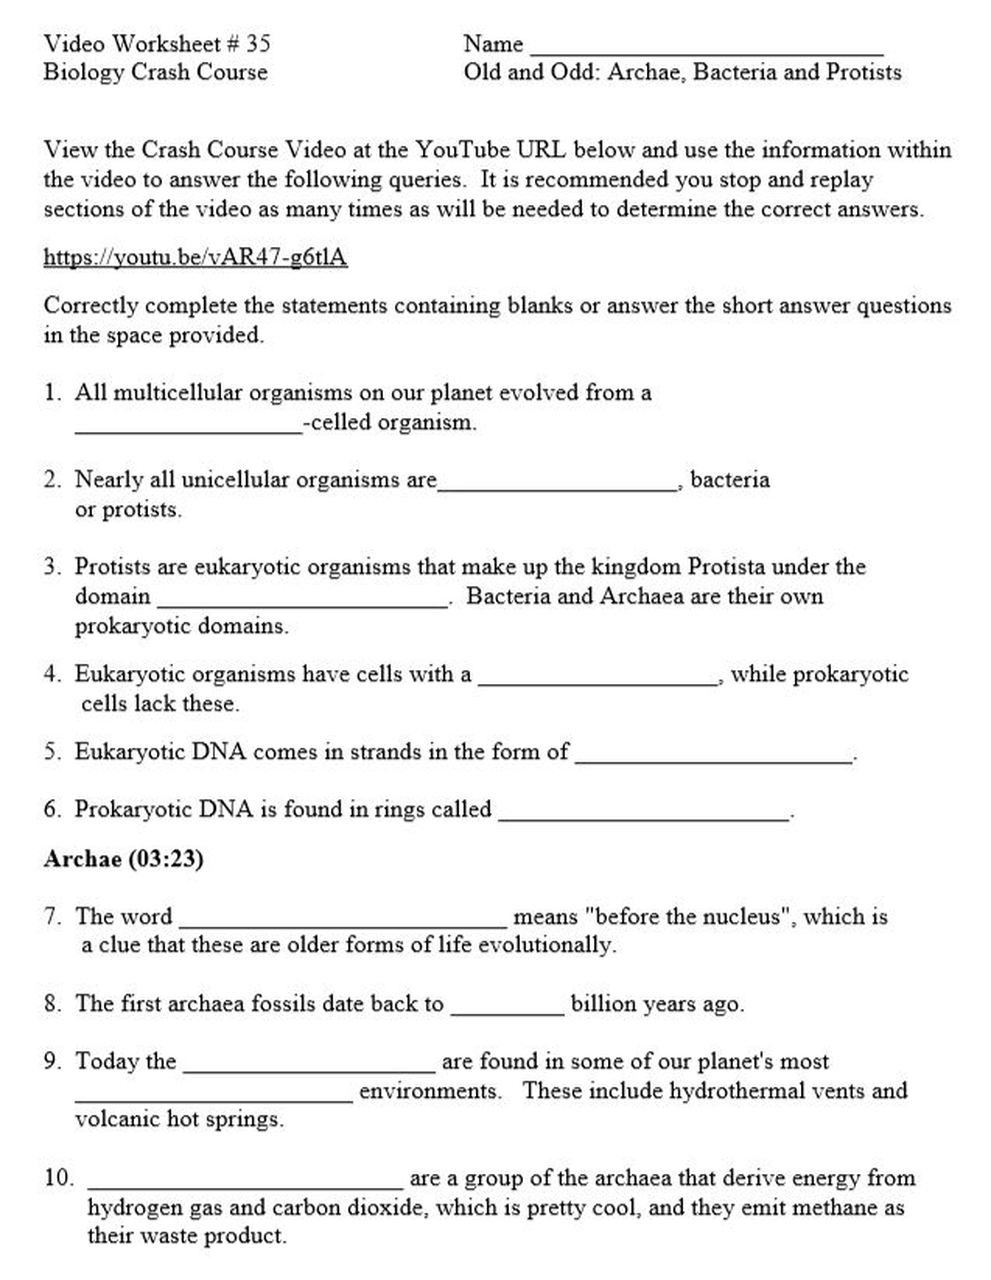 Prokaryotes Bacteria Worksheet Answers Crash Course Biology Video Worksheet 35 Old and Odd Archae Bacteria and Protists